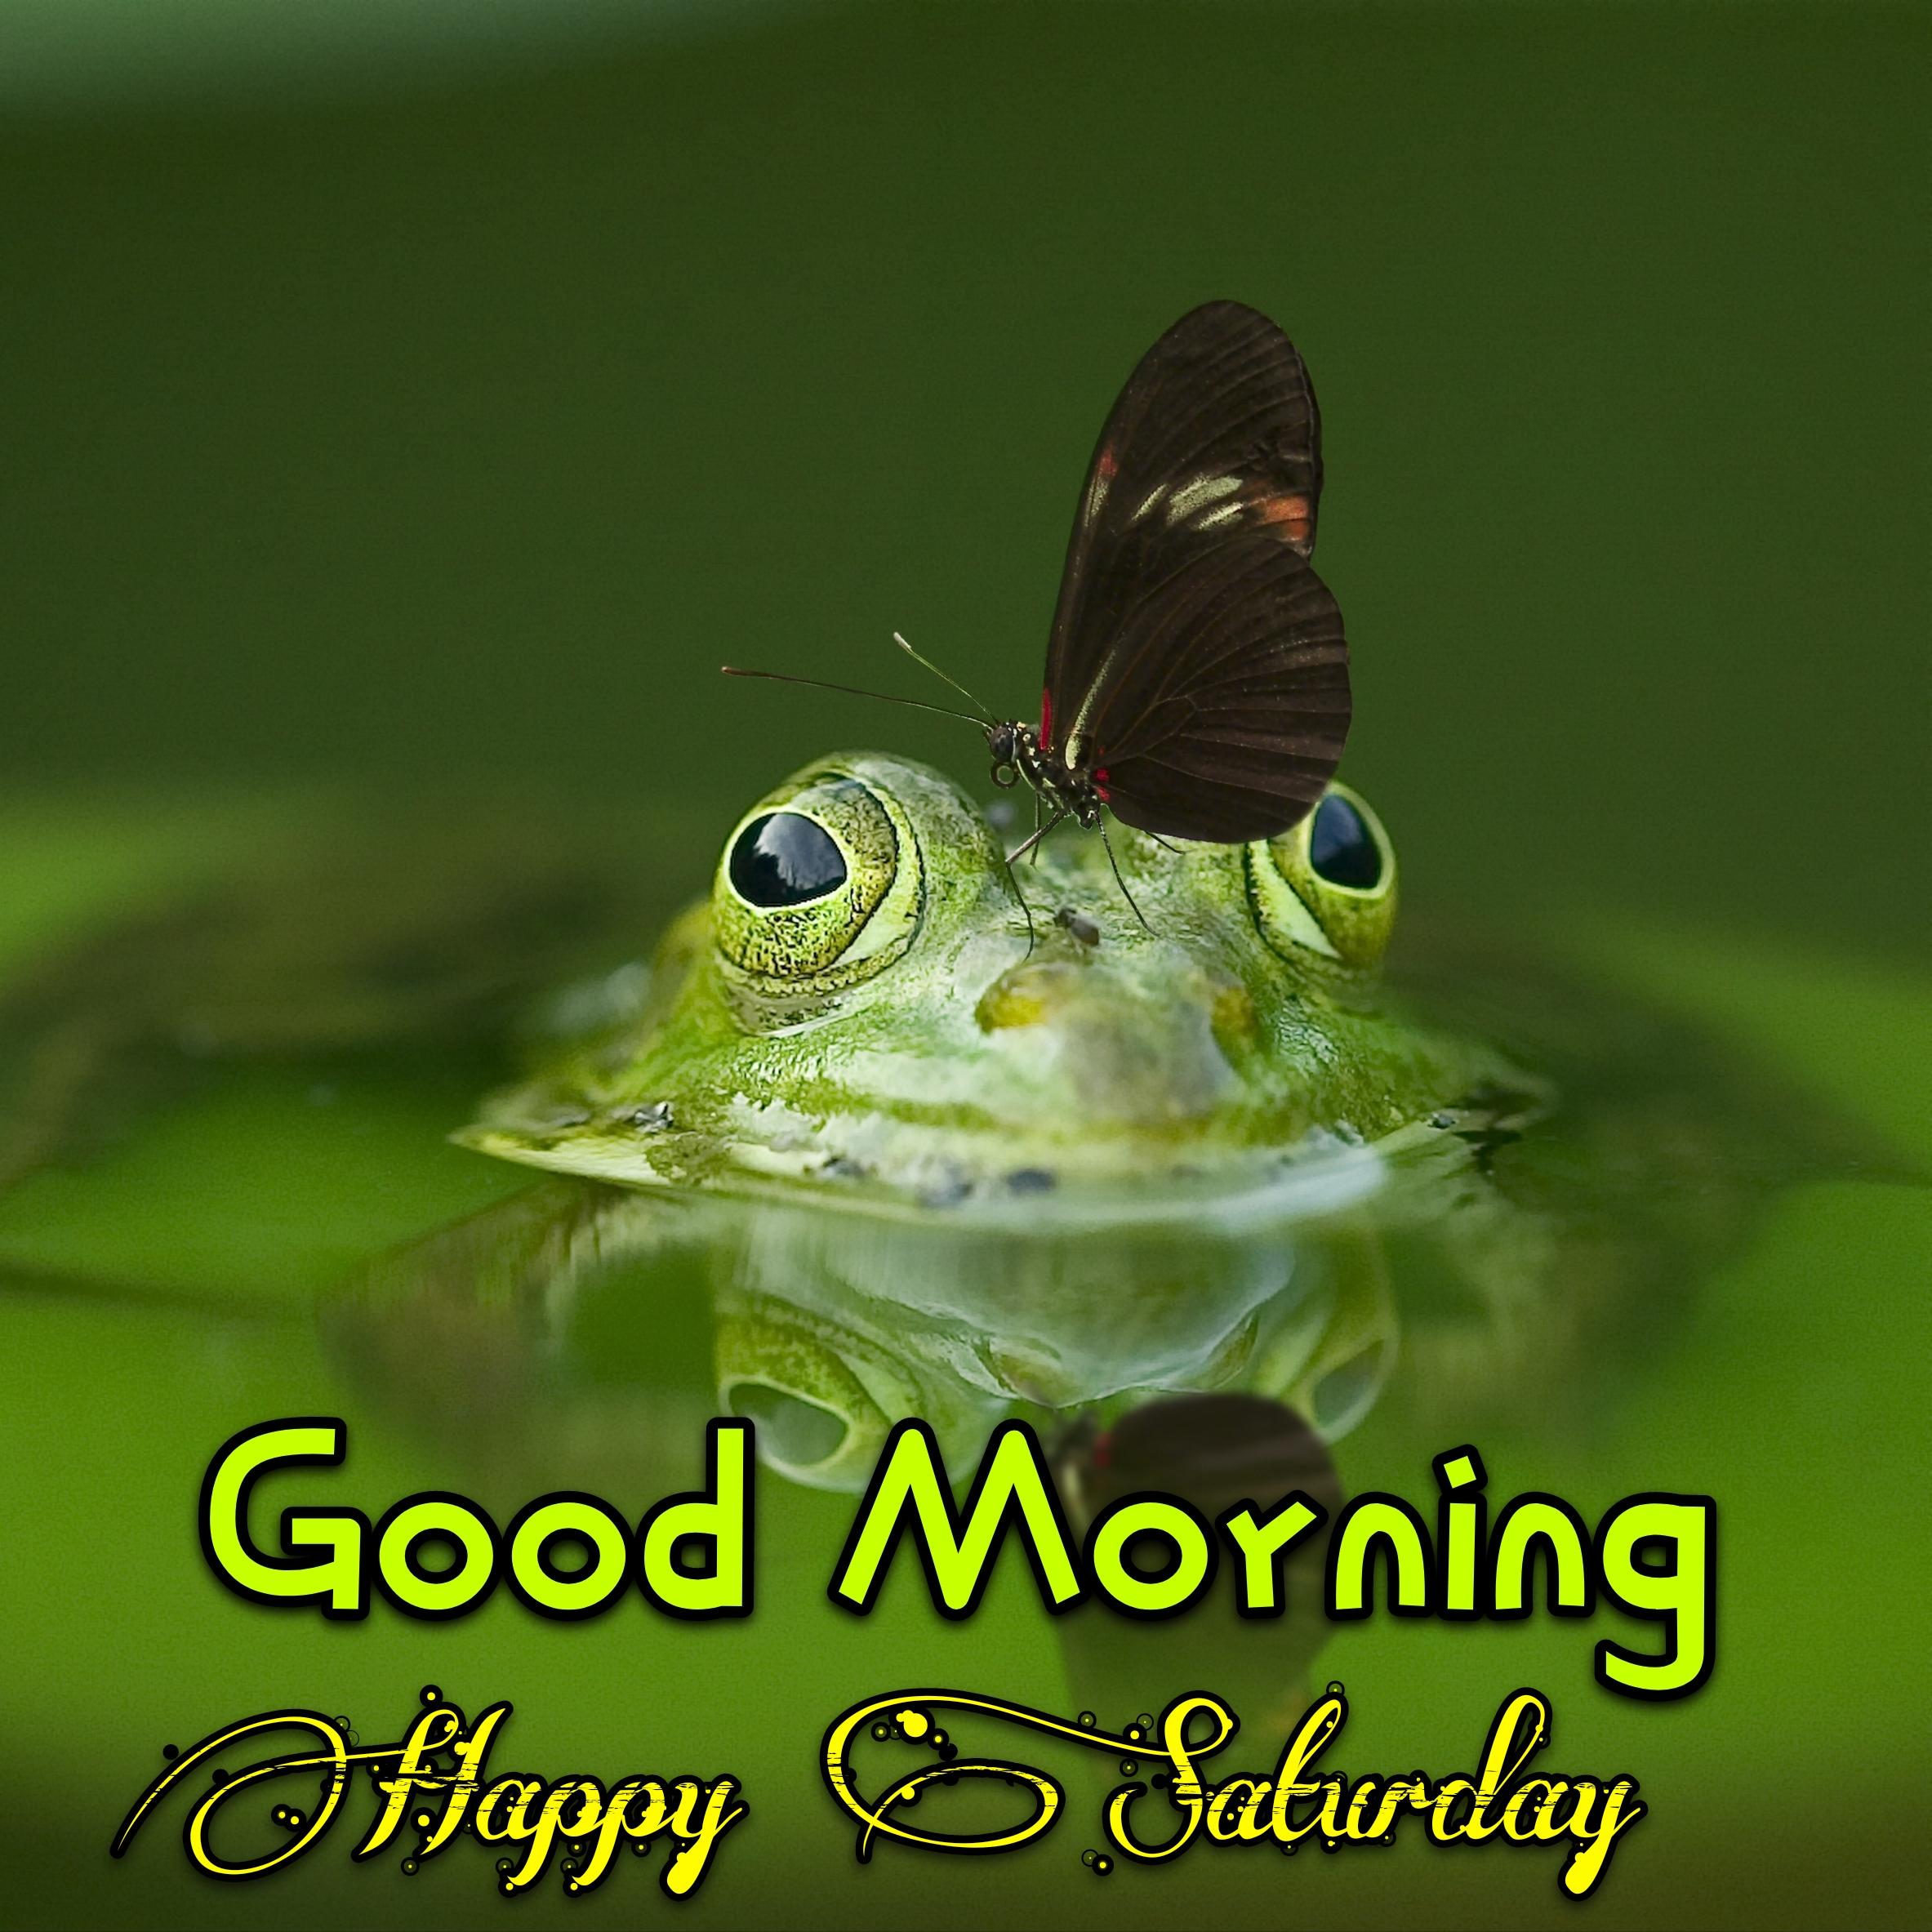 Good Morning Happy Saturday Frog Images